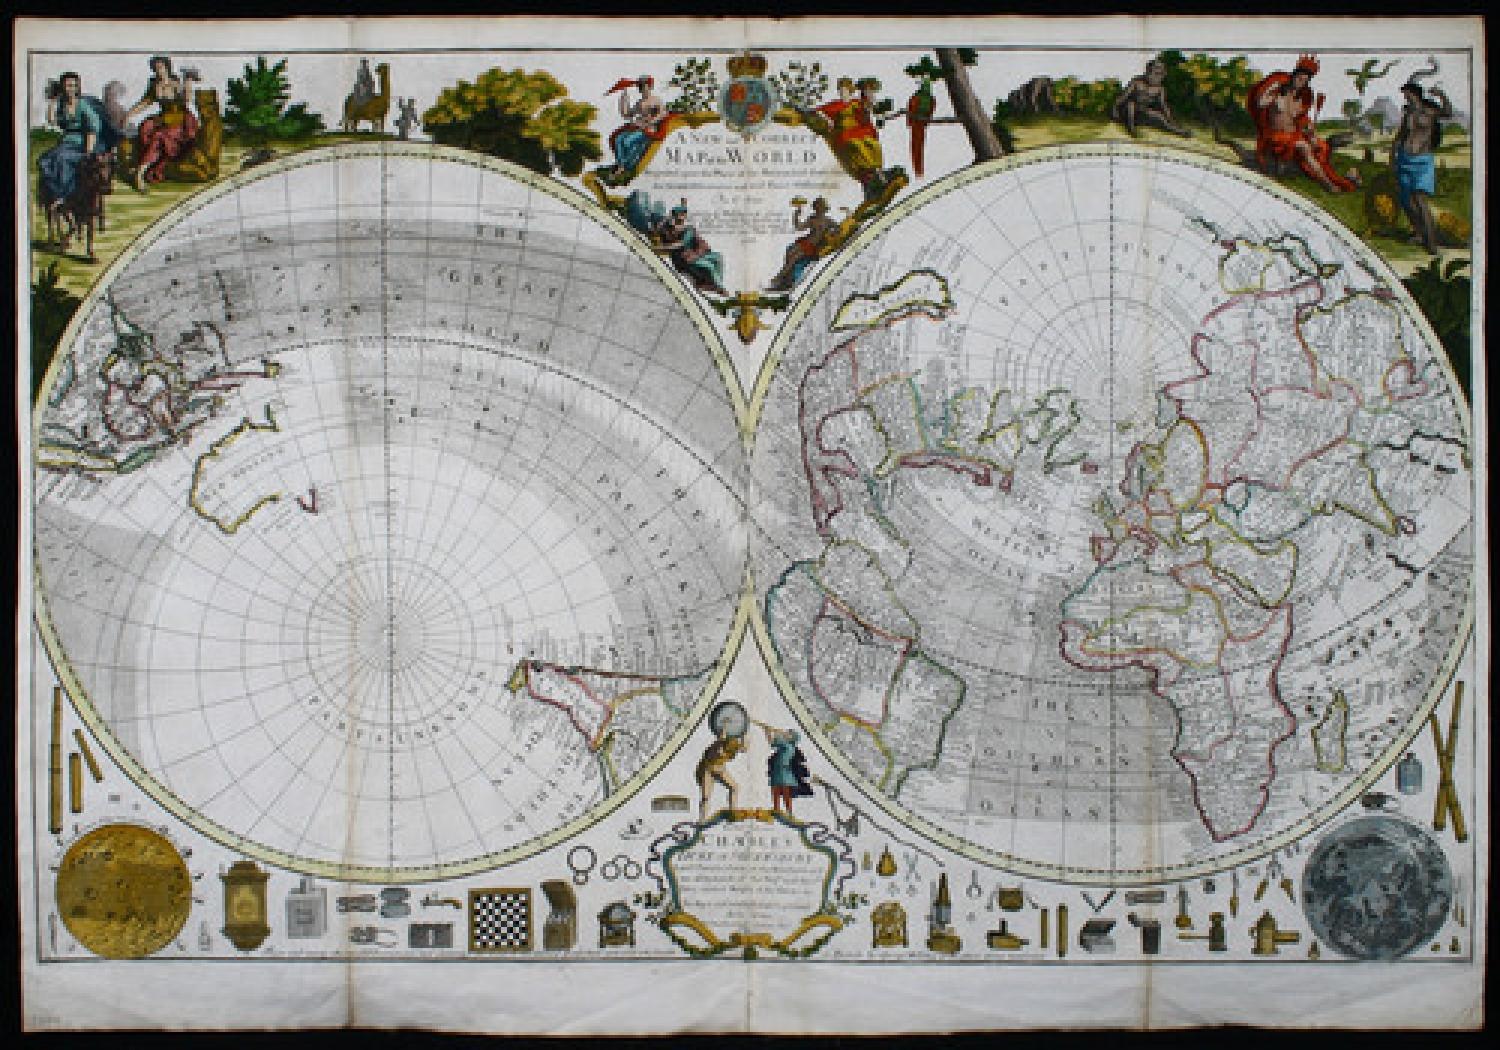 SOLD A New and Correct Map of the World projected upon the Plane of the Horizon